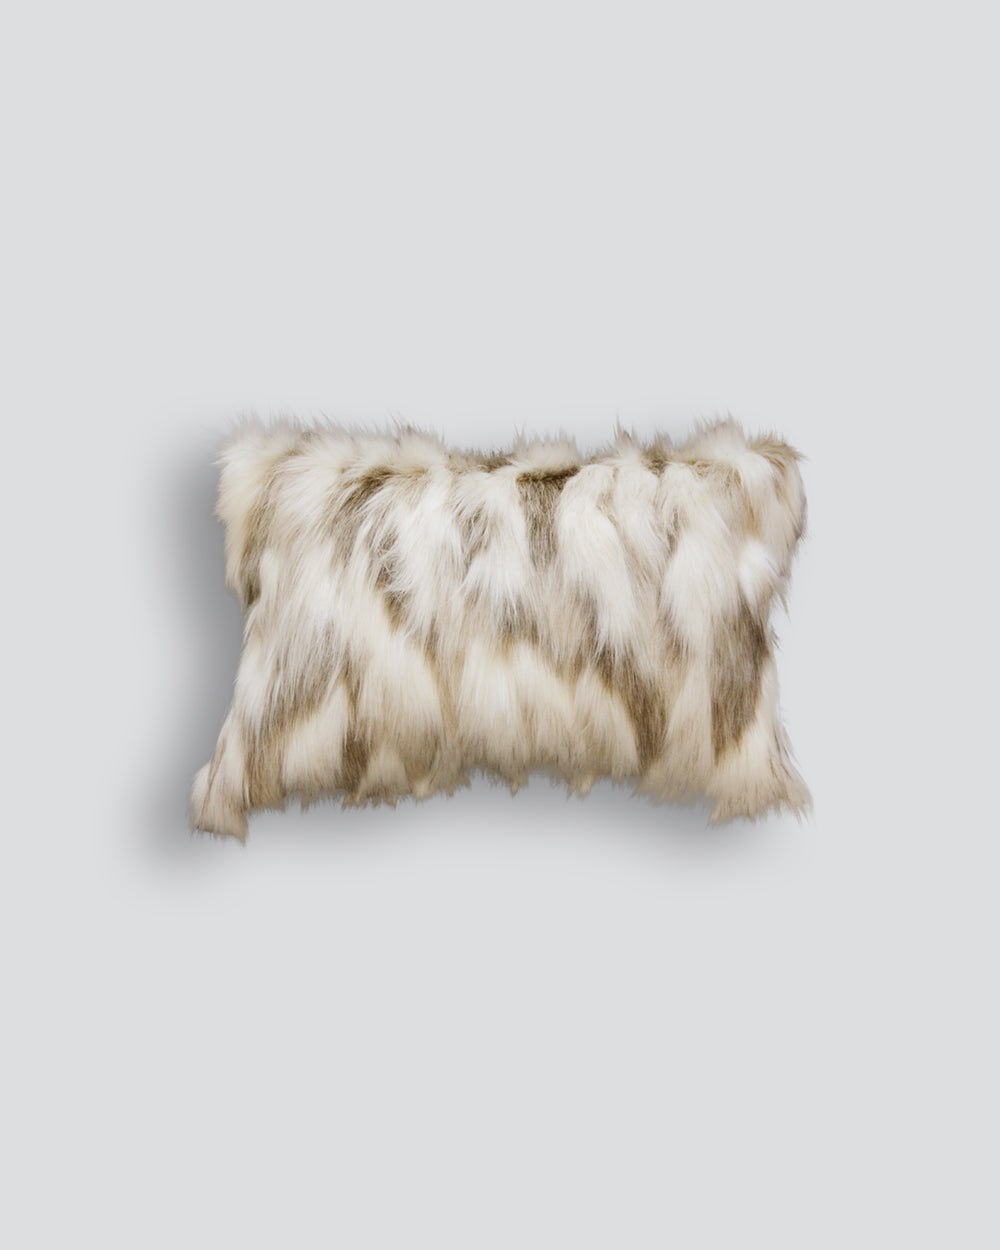 Heirloom Snowshoe Hare Cushions in Faux Fur are available from Make Your House A Home Premium Stockist. Furniture Store Bendigo, Victoria. Australia Wide Delivery. Furtex Baya.